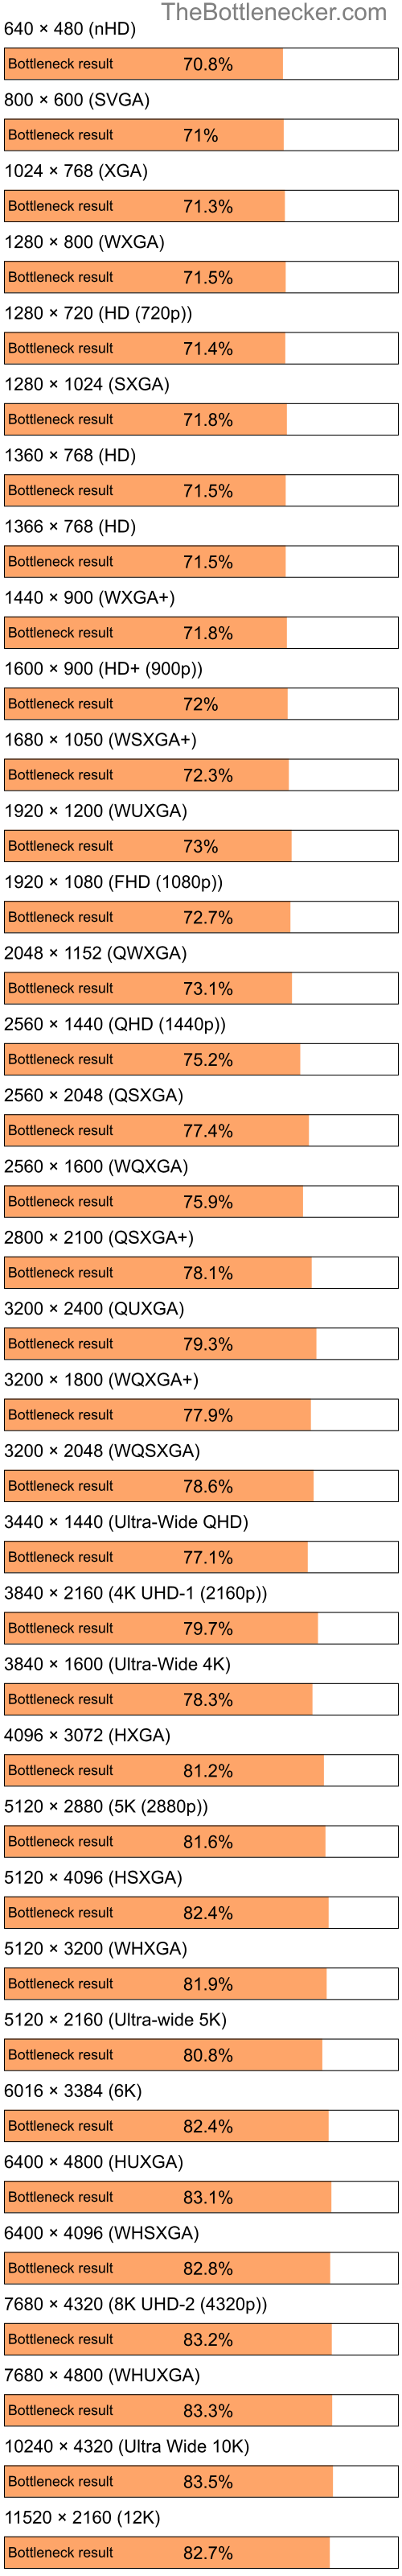 Bottleneck results by resolution for Intel Atom Z520 and AMD Radeon 2100 in7 Days to Die